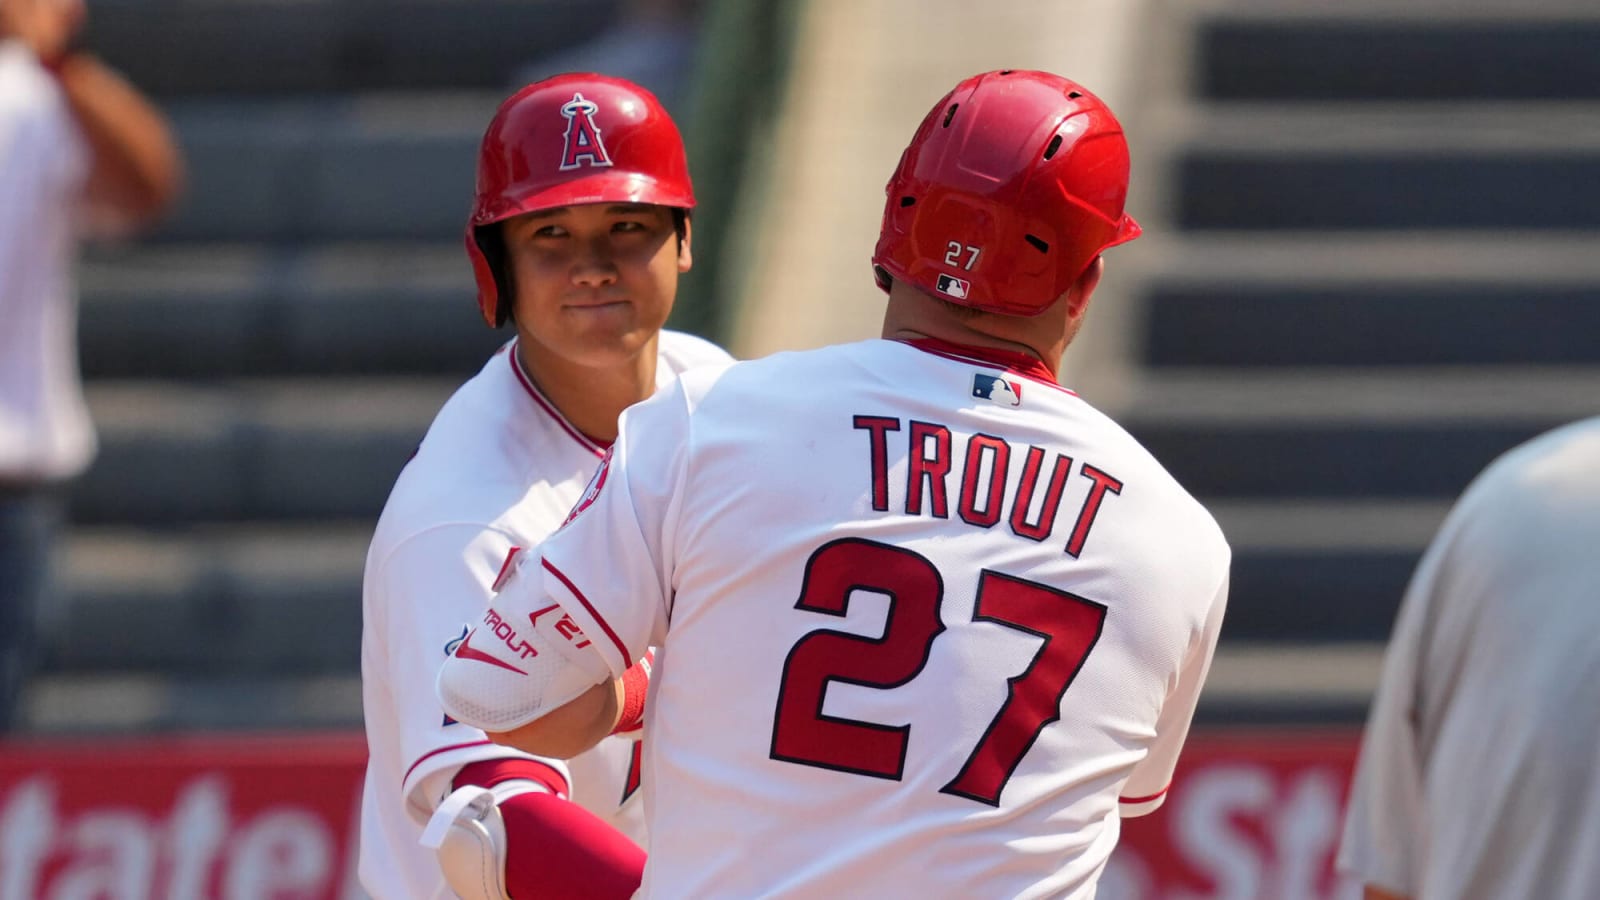  Mike Trout & Shohei Ohtani Trying To ‘Finish Strong’ Following Blowout Win